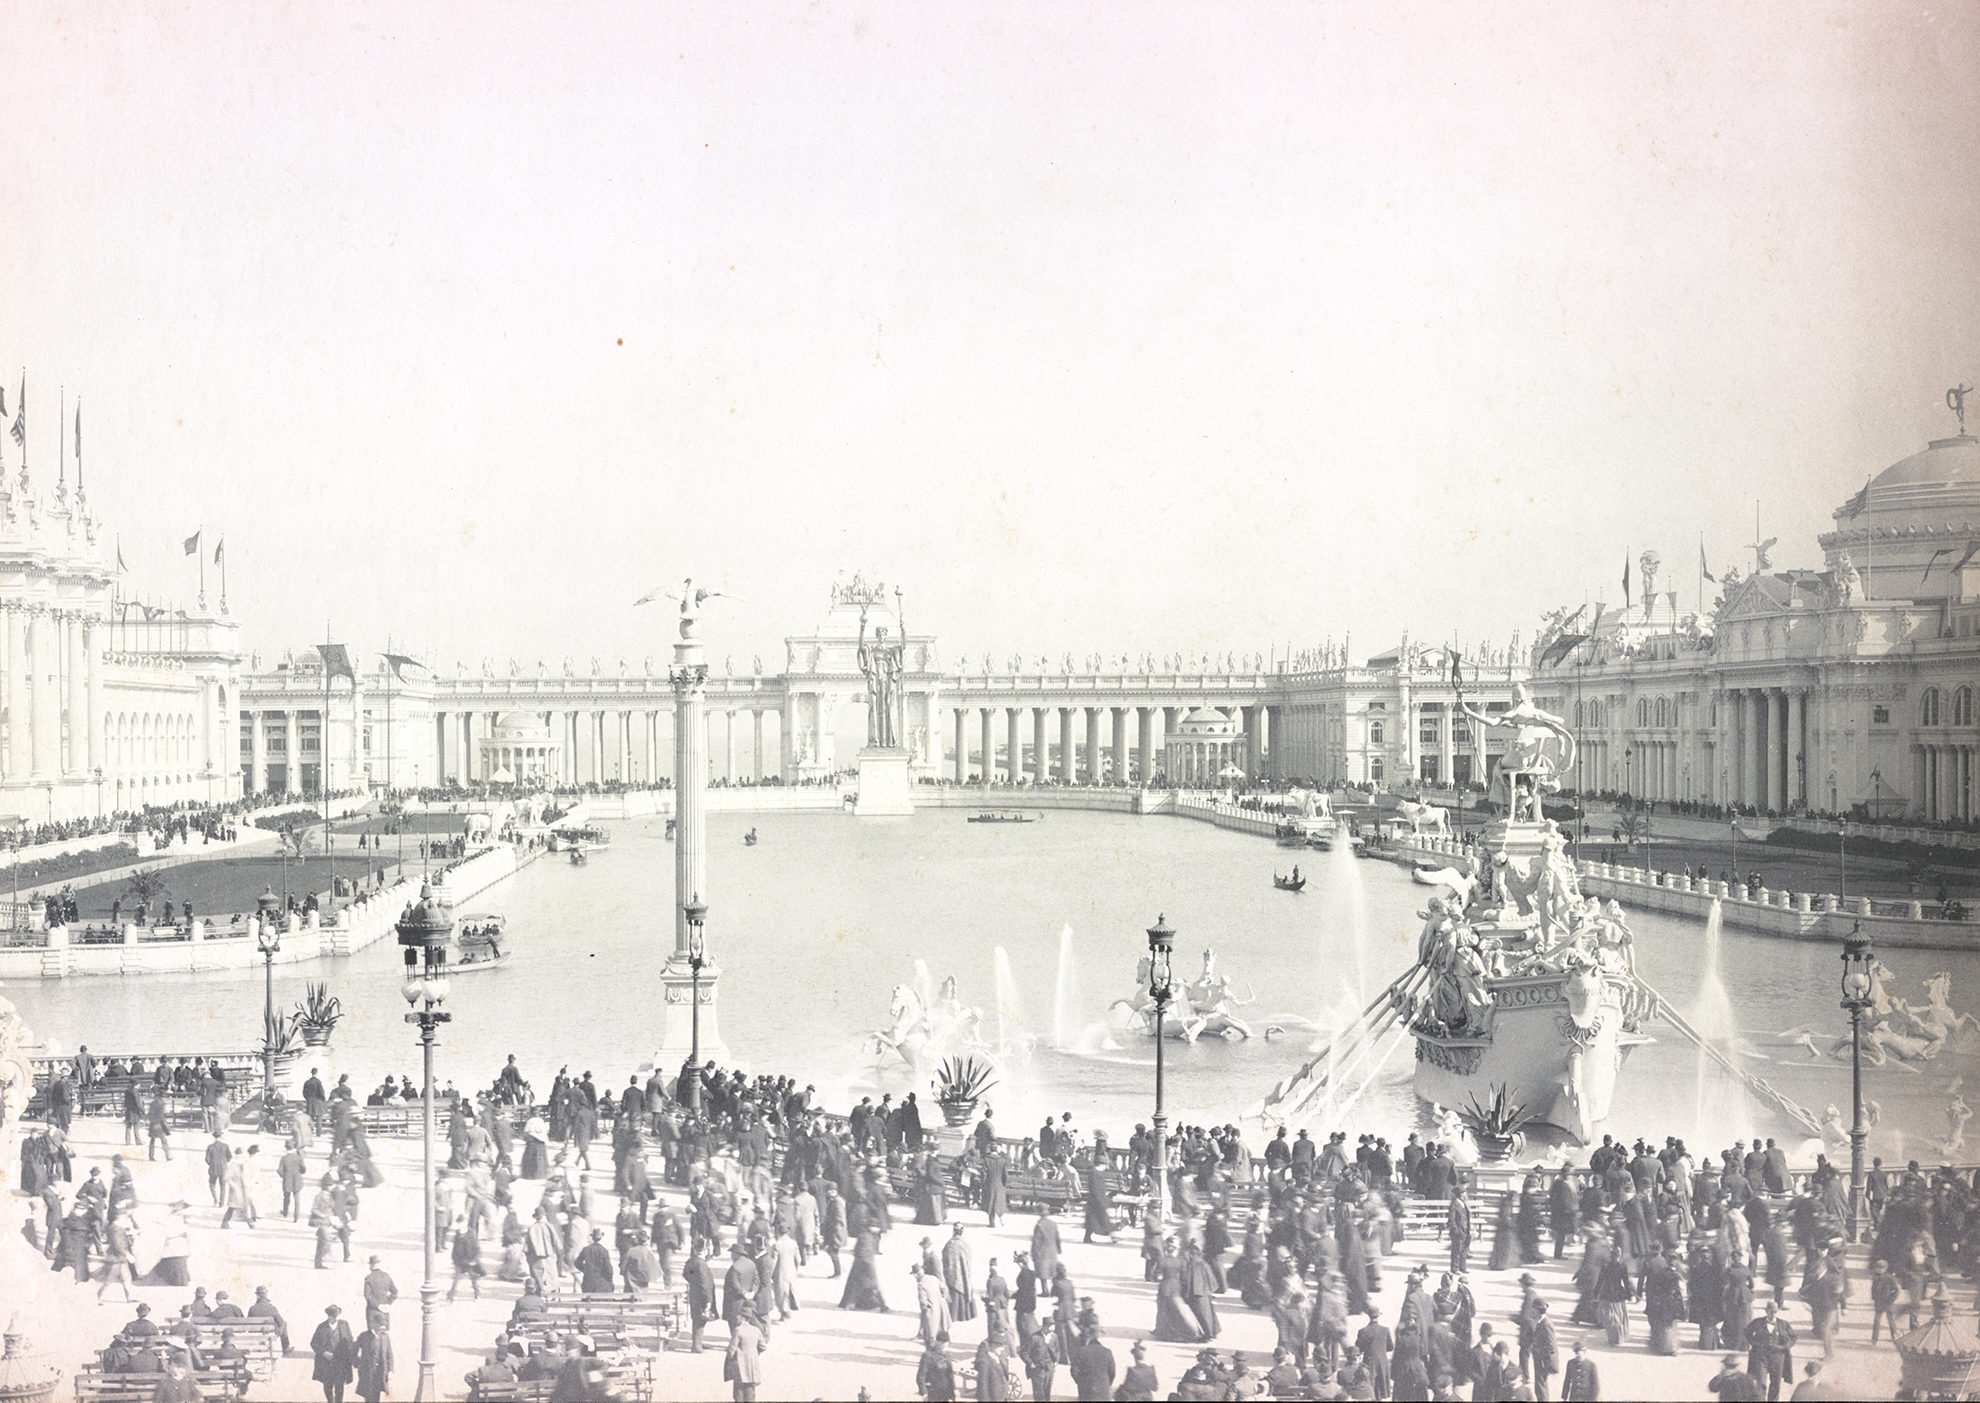 The World's Columbian Exposition: The White City and fairgrounds (article)